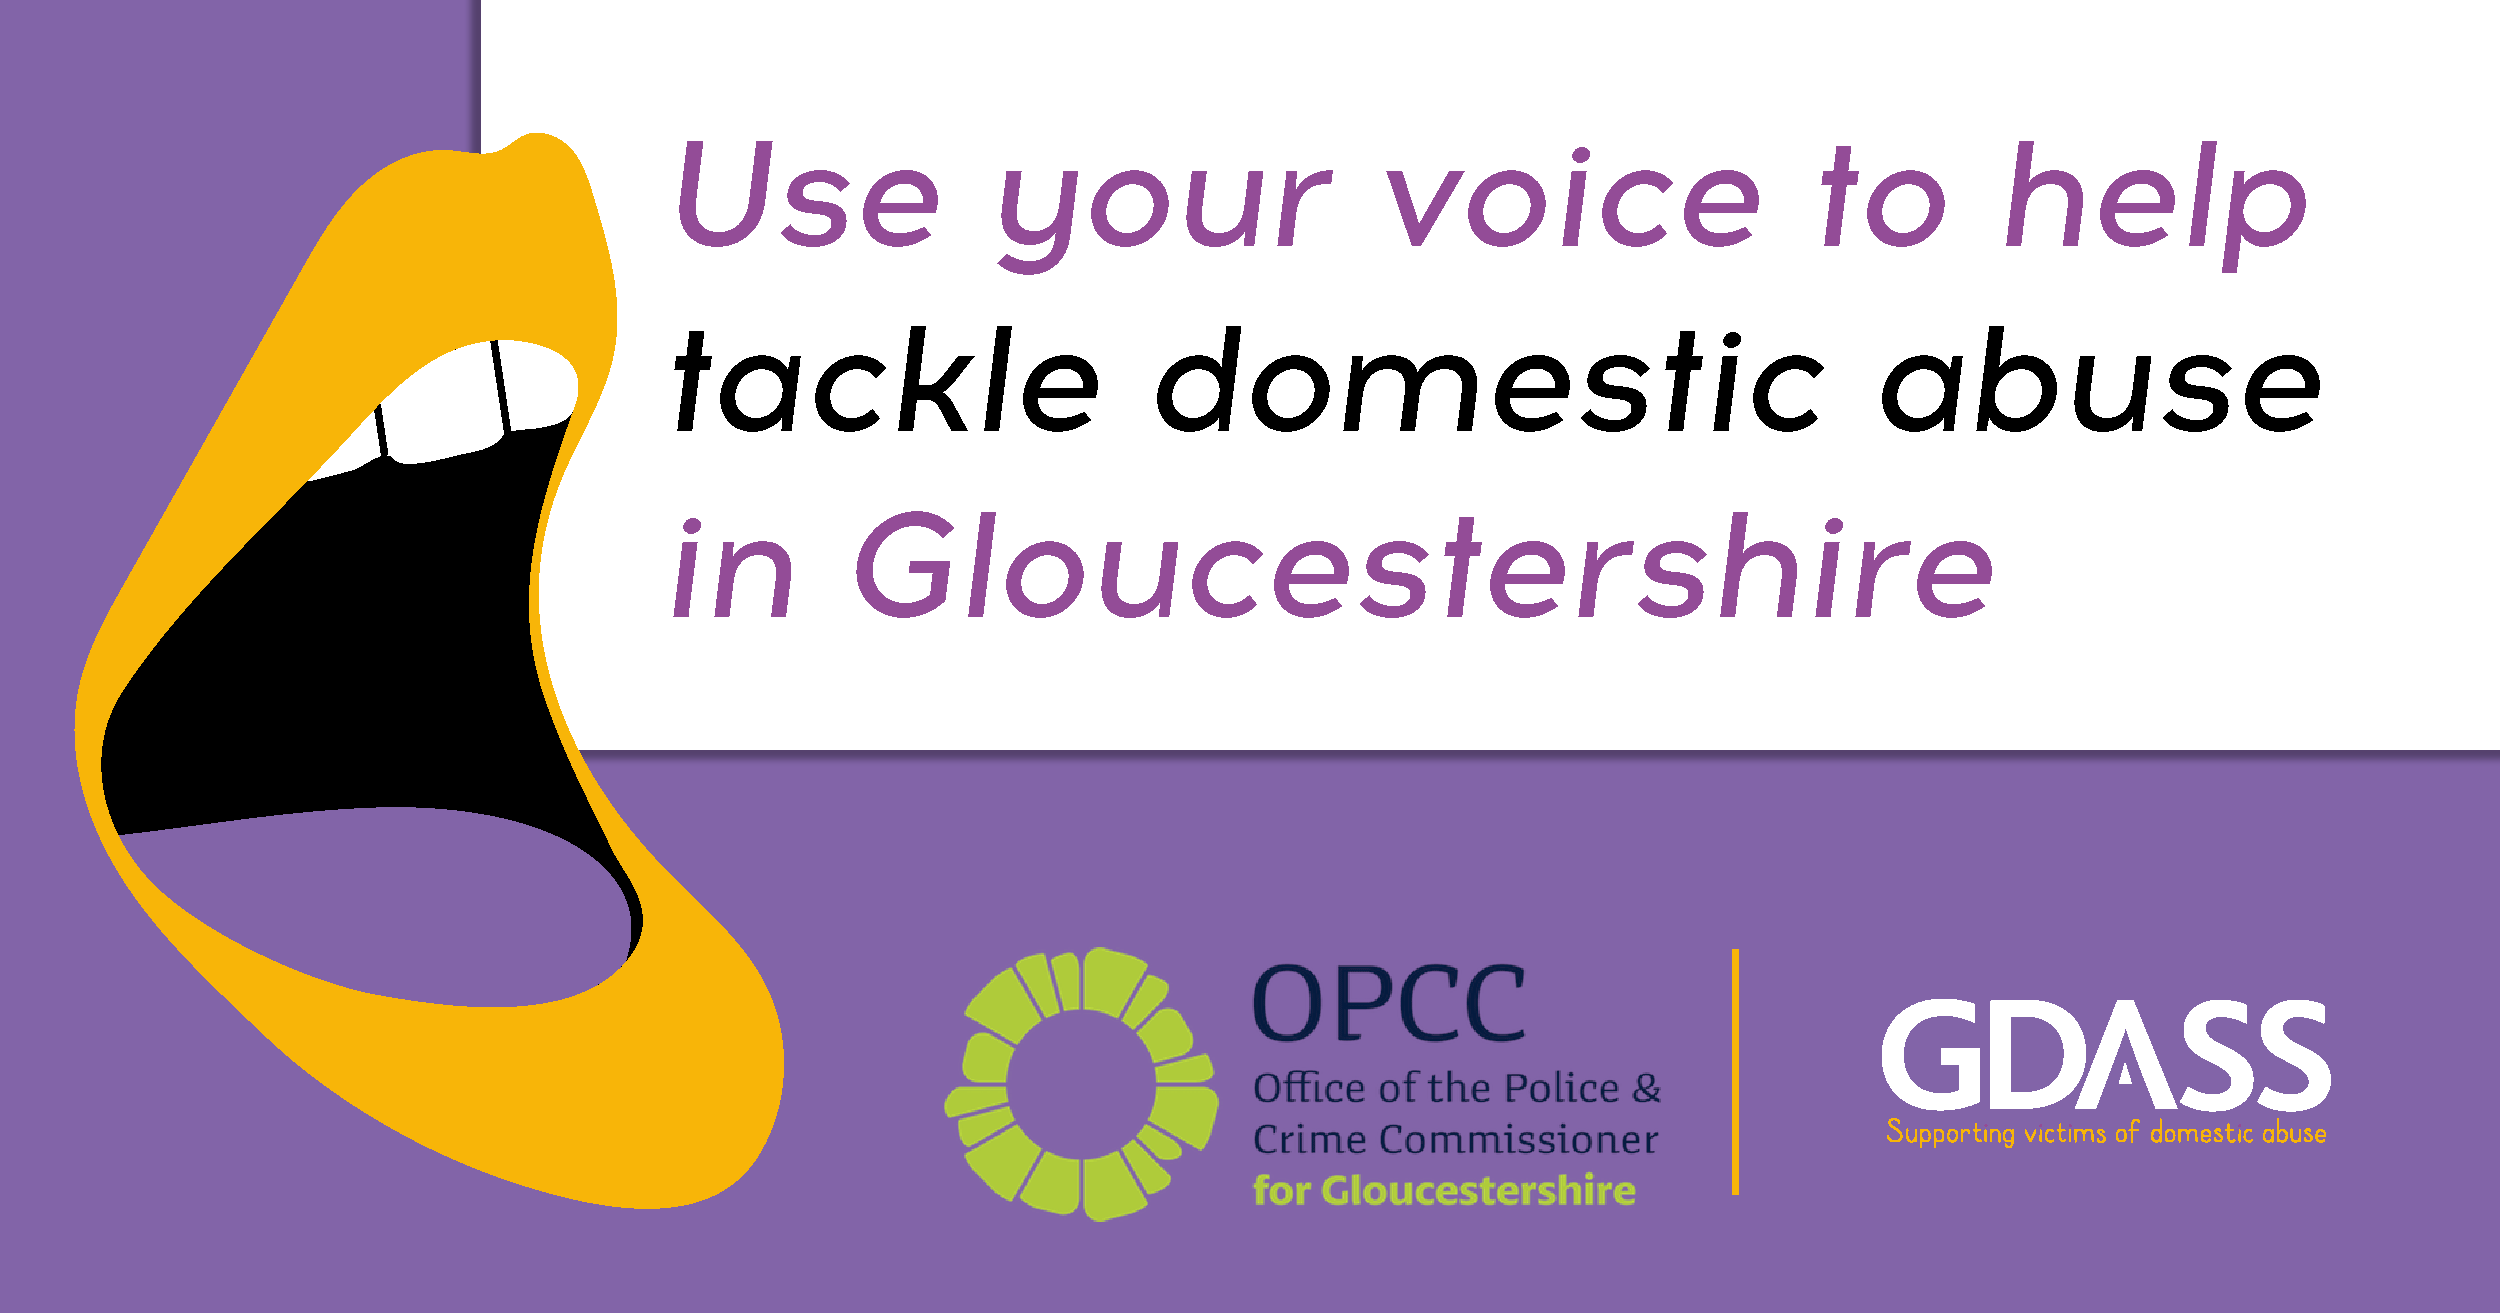 Use your voice to tackle domestic abuse in Gloucestershire